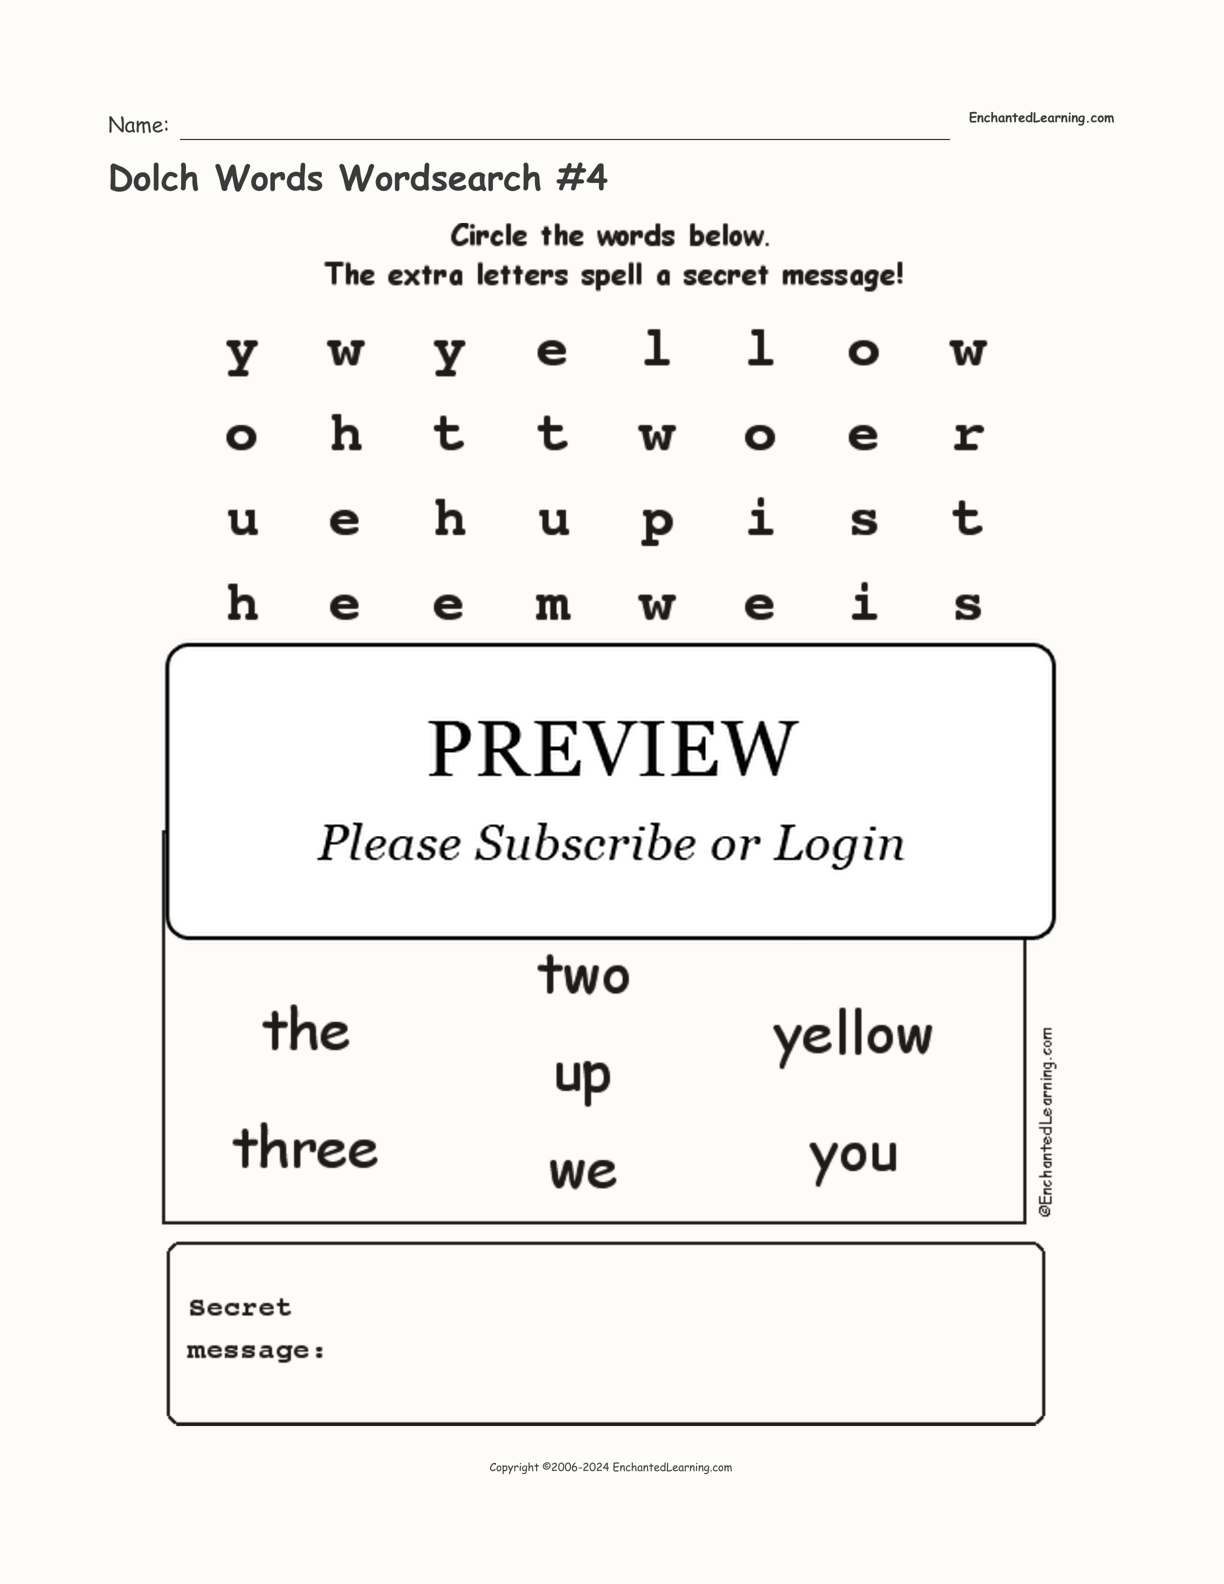 Dolch Words Wordsearch #4 interactive worksheet page 1